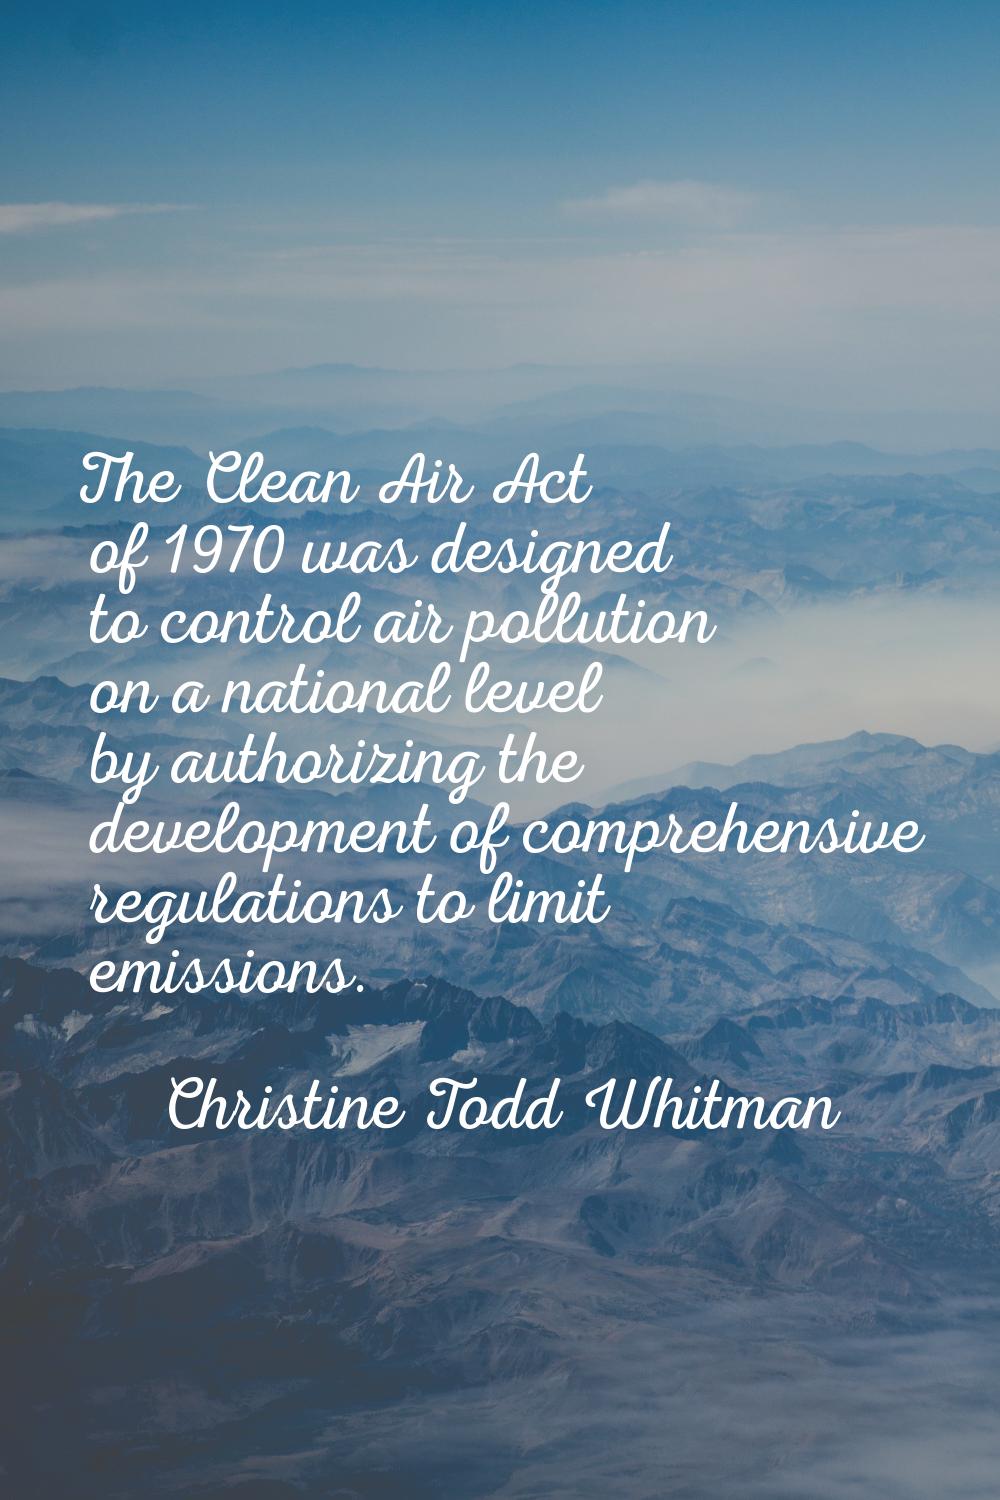 The Clean Air Act of 1970 was designed to control air pollution on a national level by authorizing 